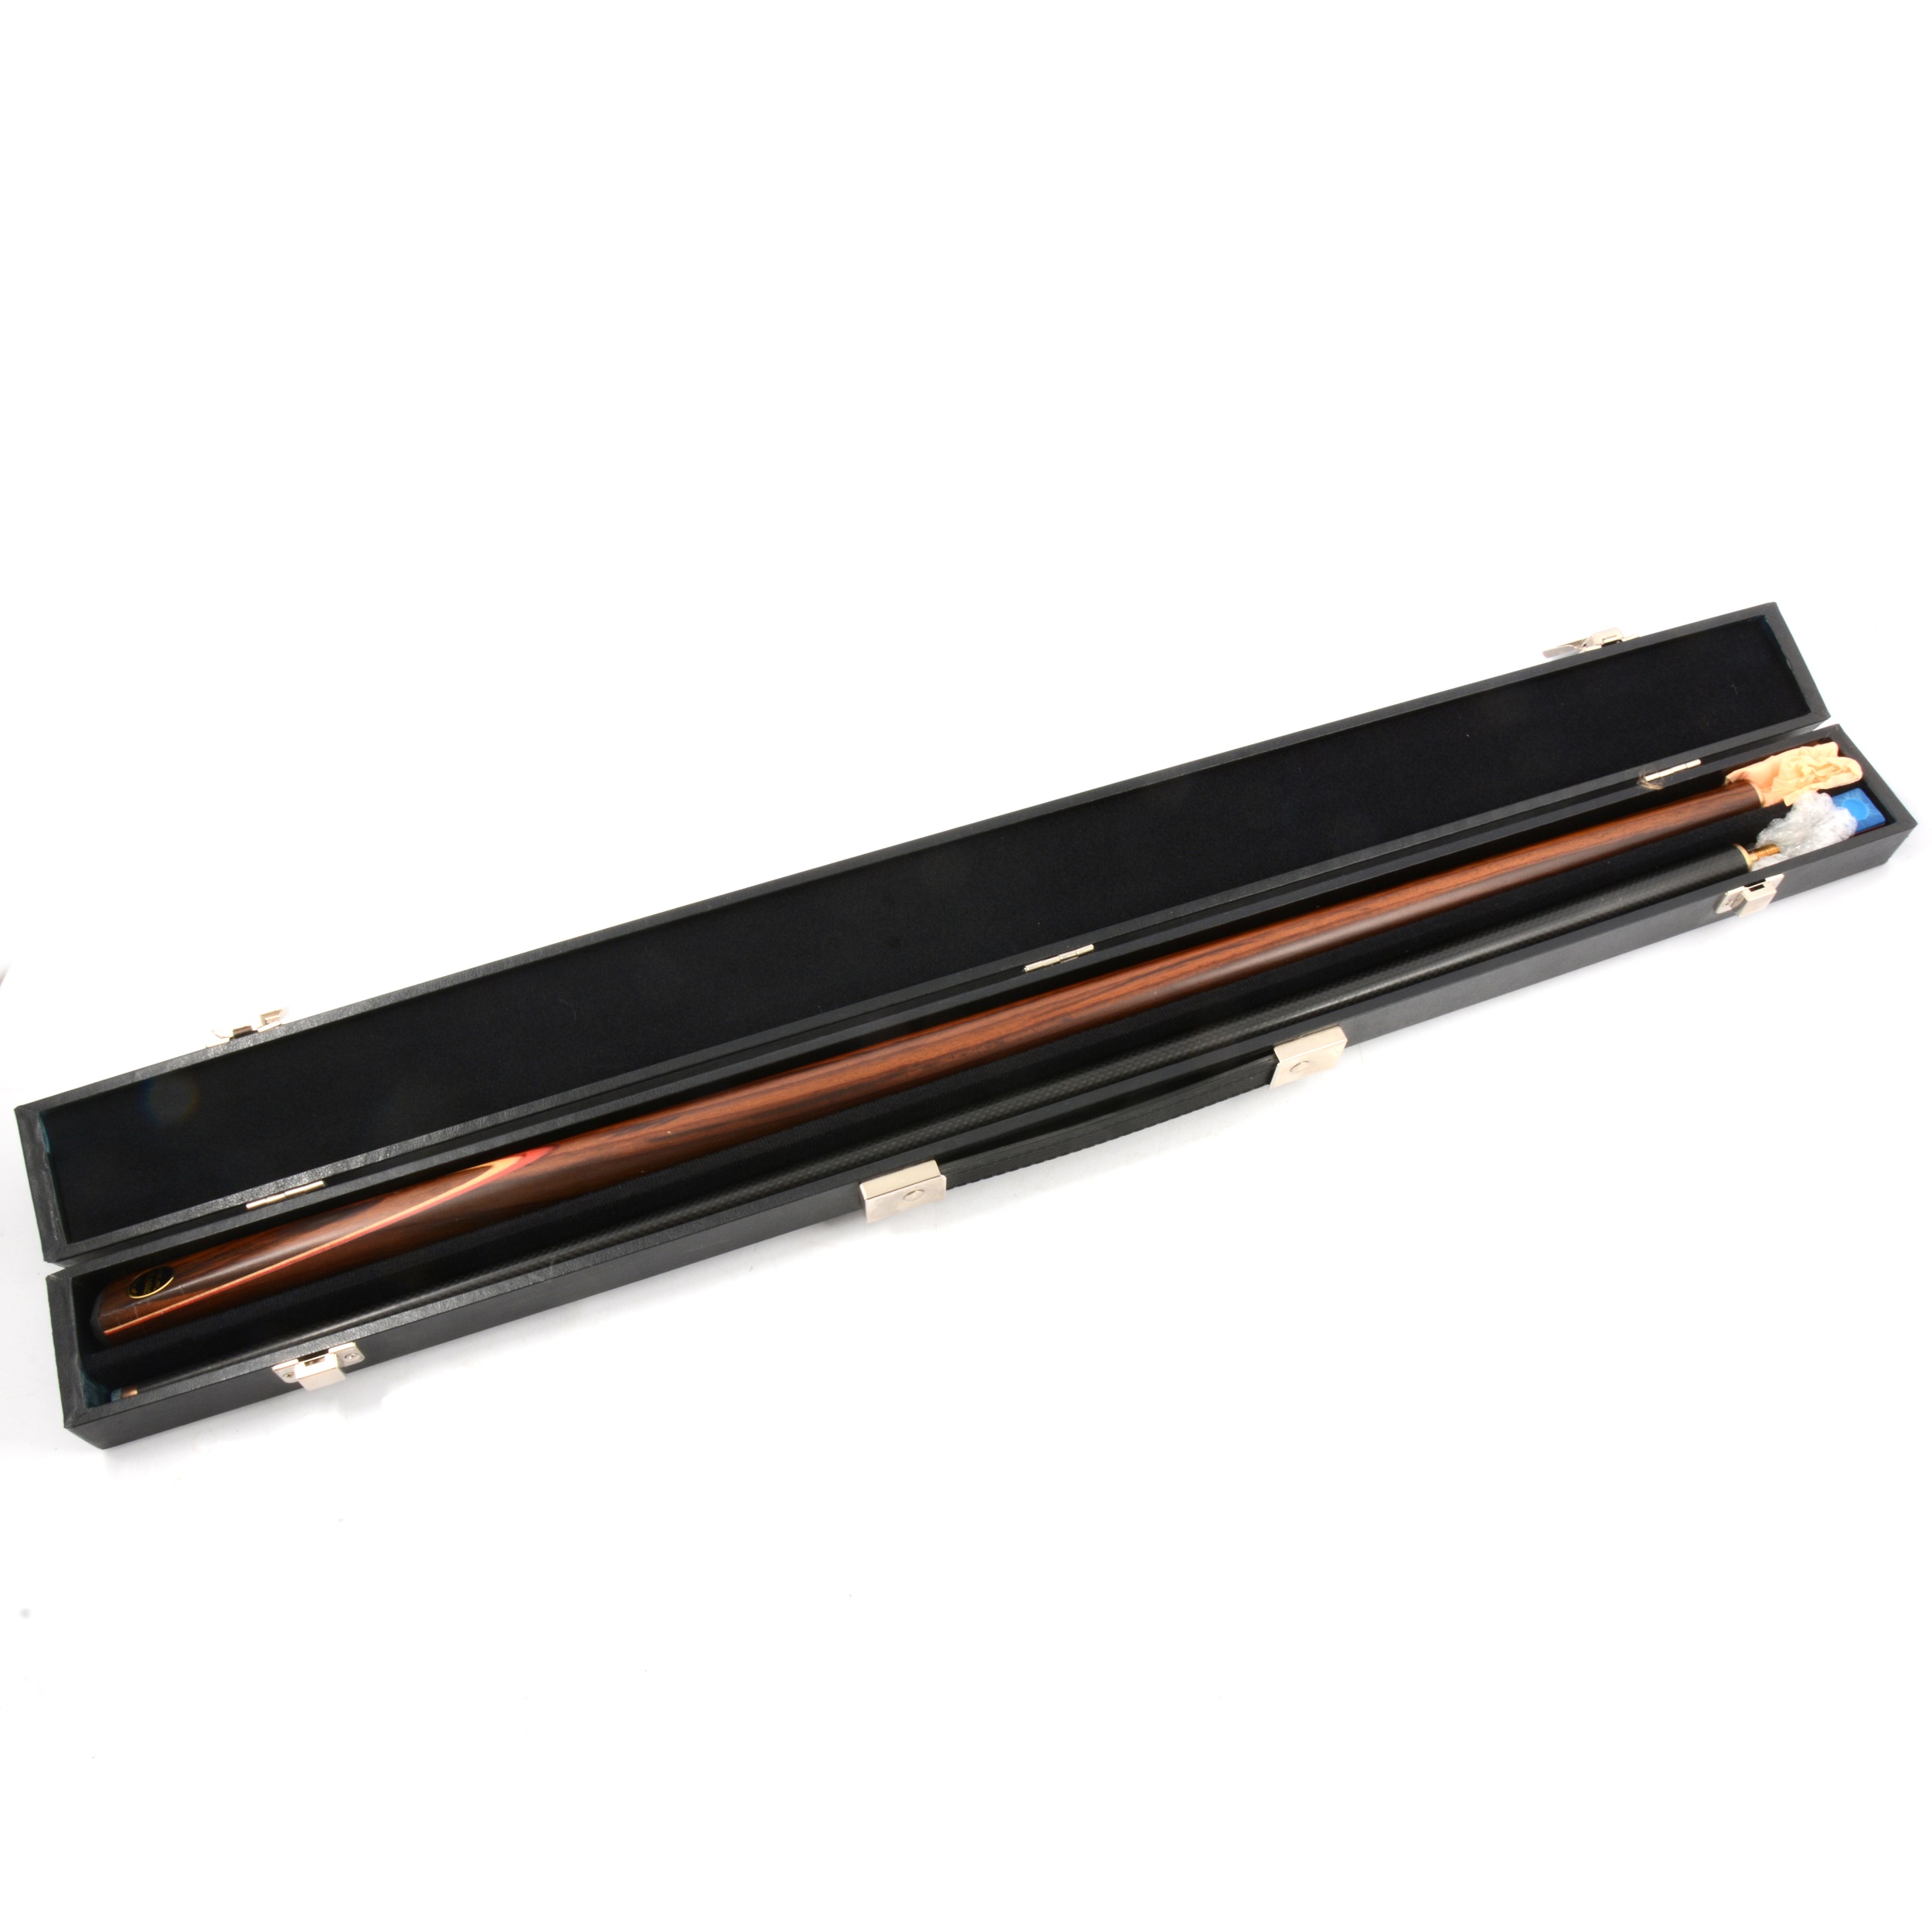 Riley Classic "Jimmy White" snooker cue, cased.